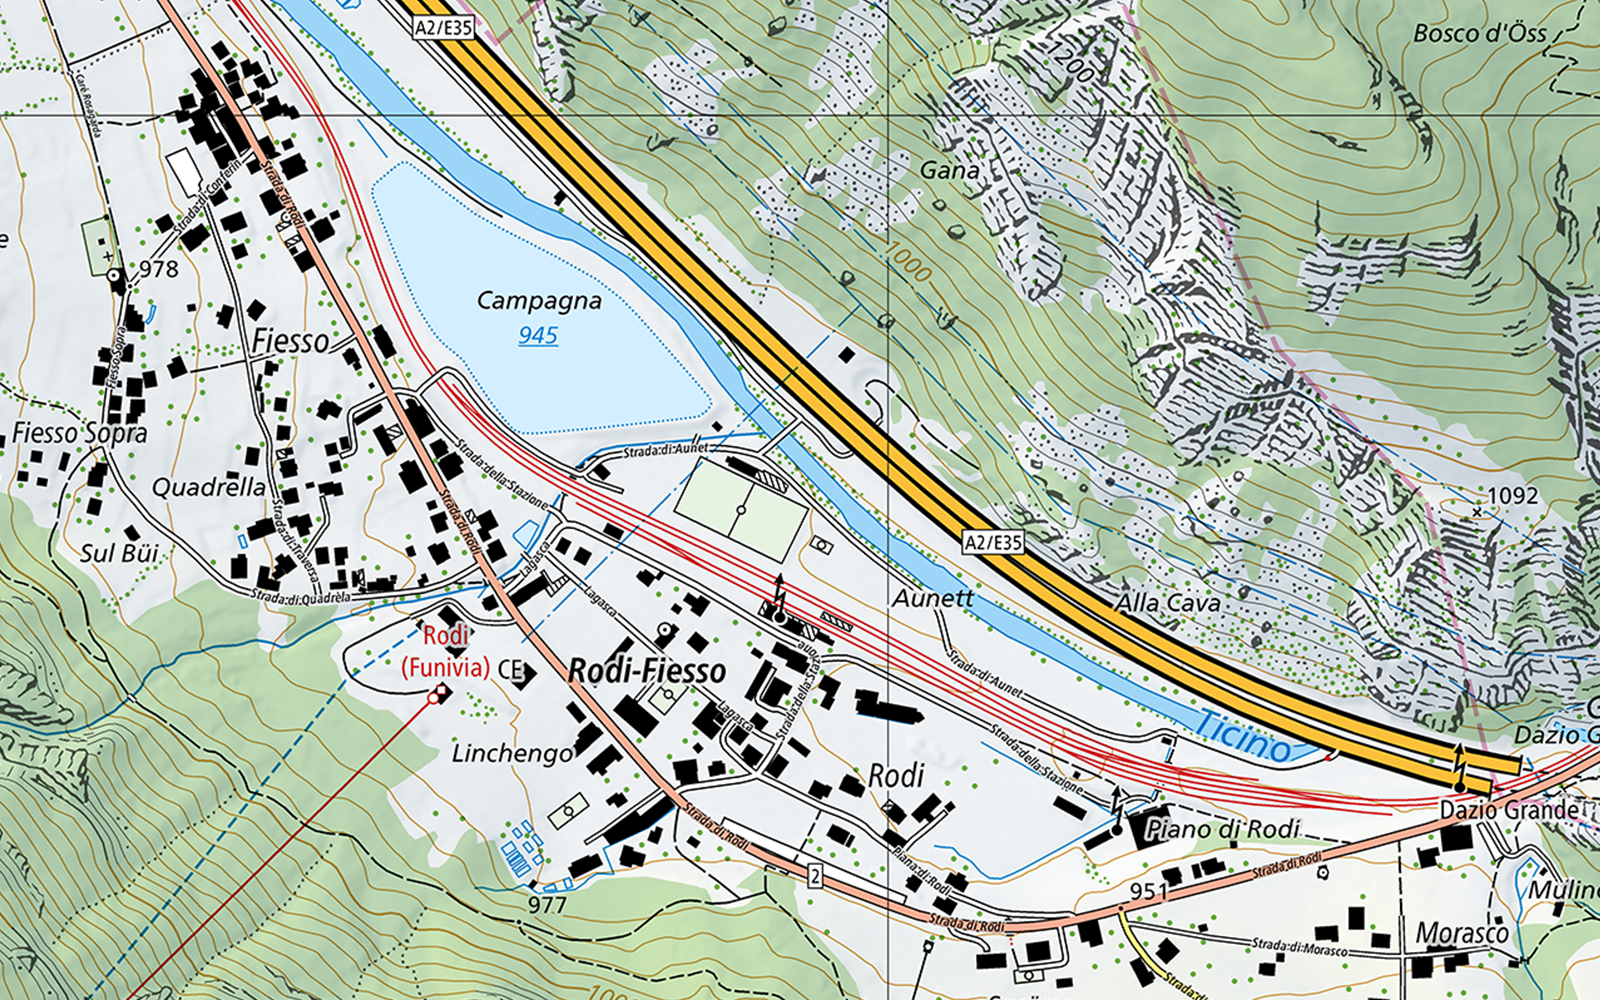 The picture shows a map of the village of Rodi-Fiesso (TI) with the surrounding area, Lake Campagna, the River Ticino and the motorway.